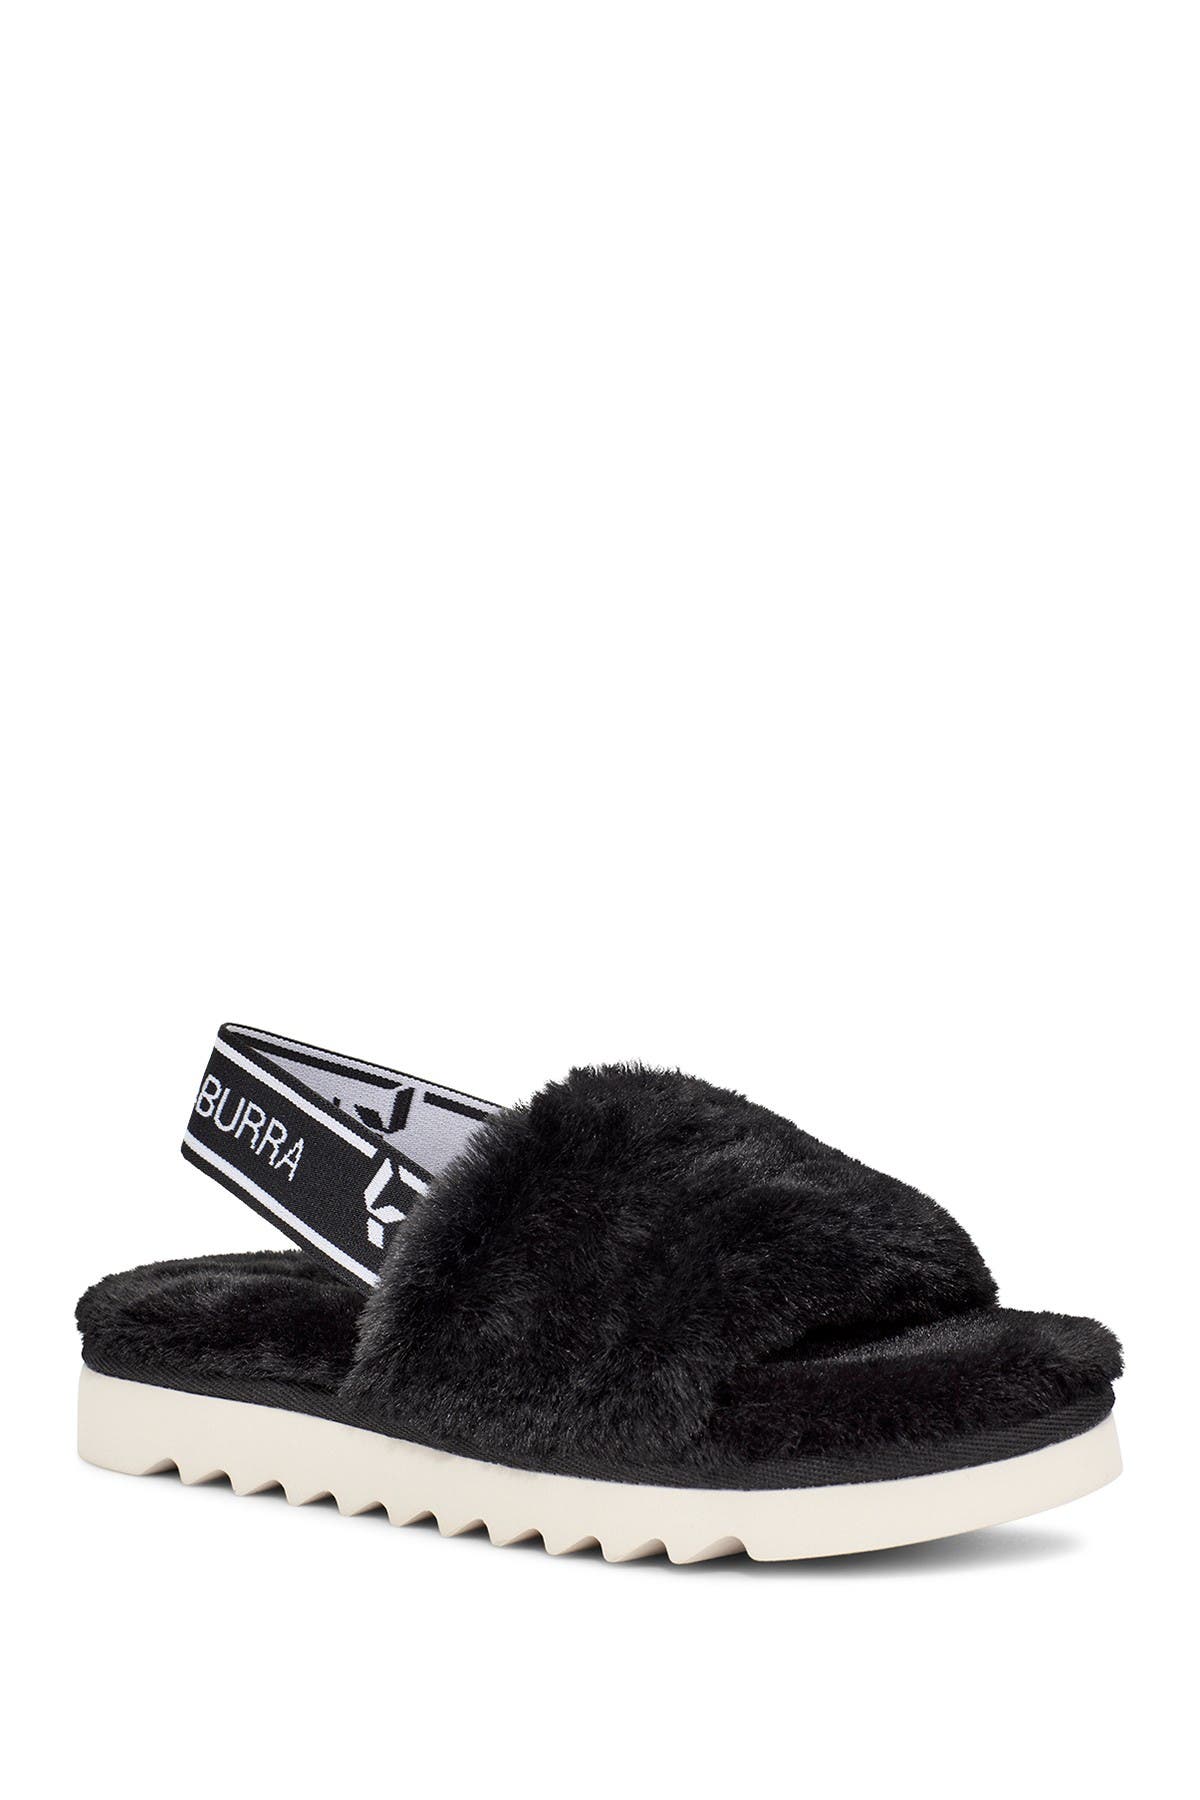 ugg furry slippers